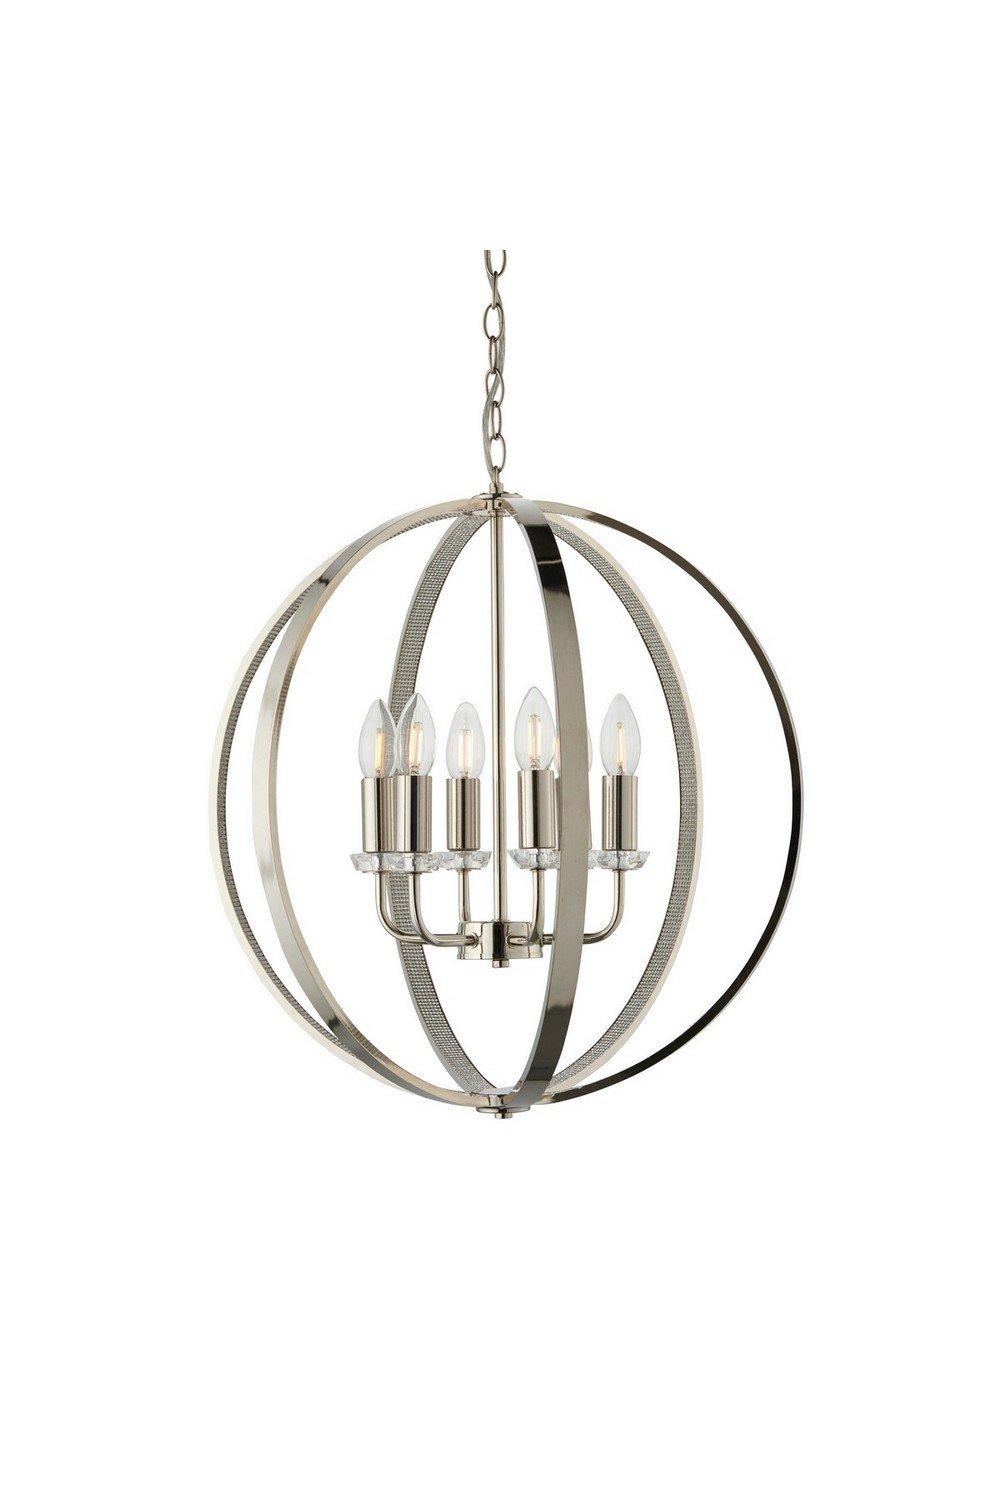 Ritz 6 Light Ceiling Pendant Bright Nickel & Clear Faceted Acrylic E14